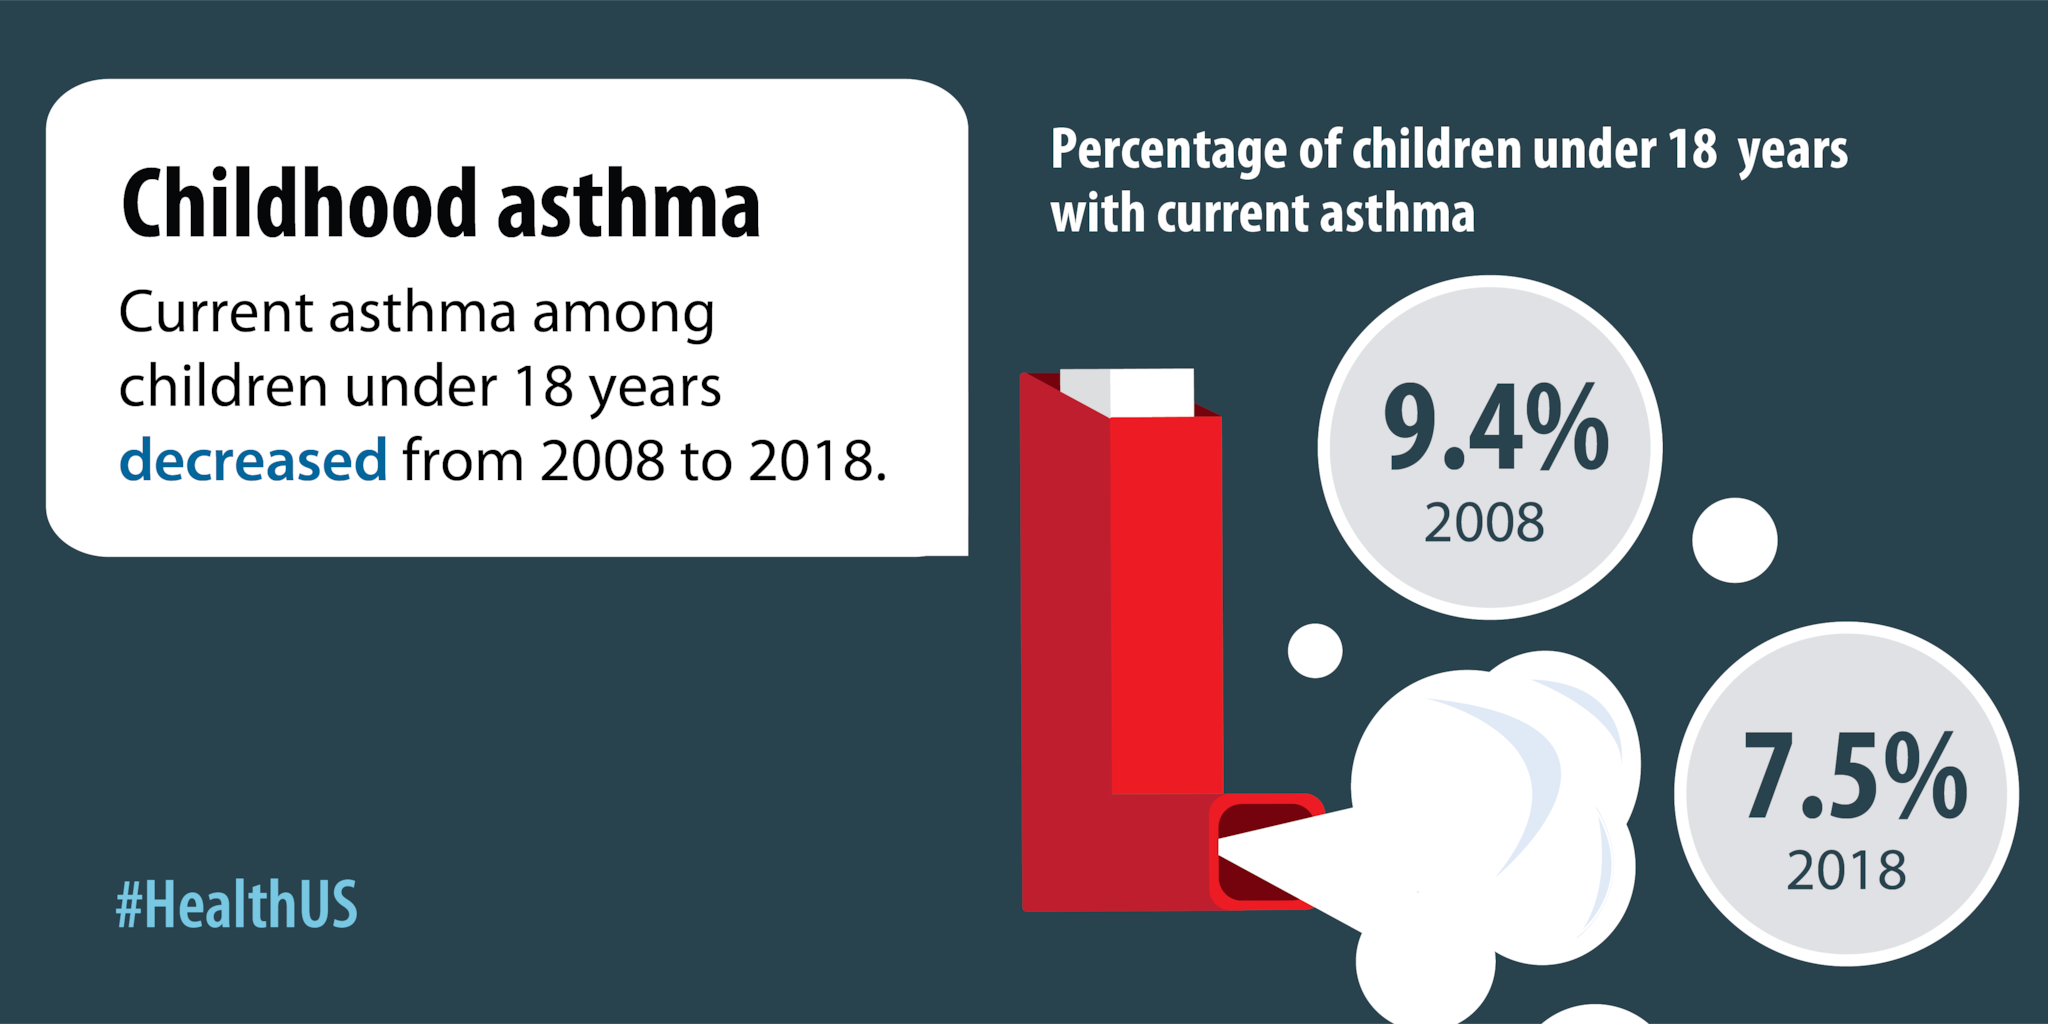 Current asthma among children under 18 years decreased from 2008 to 2018.